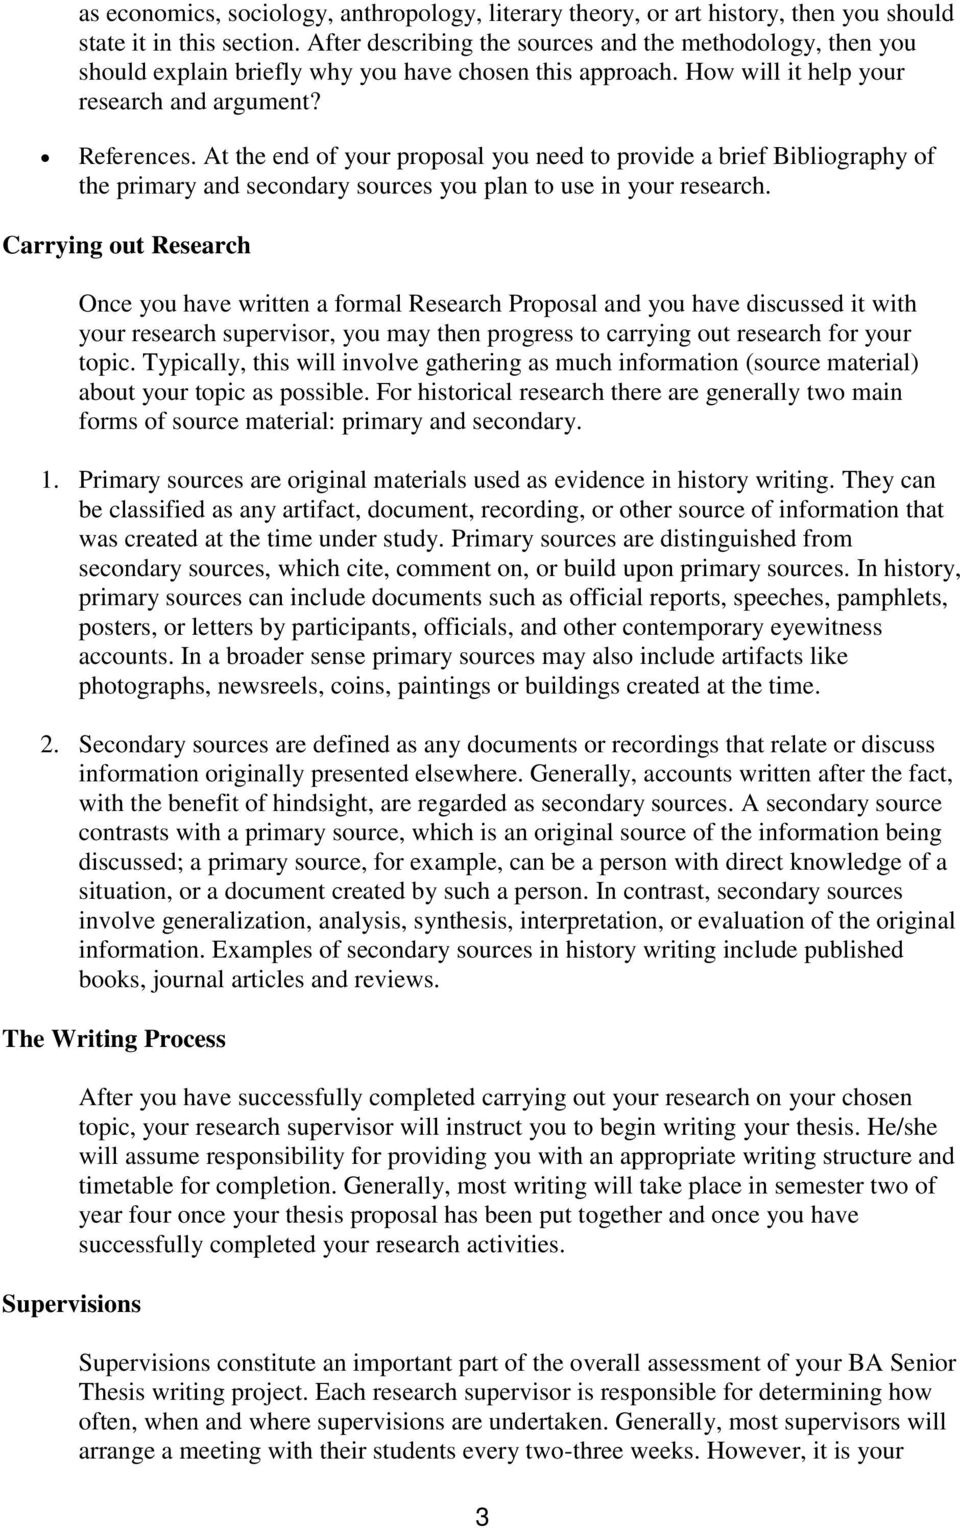 University of Macau Department of History. Guidelines for Writing